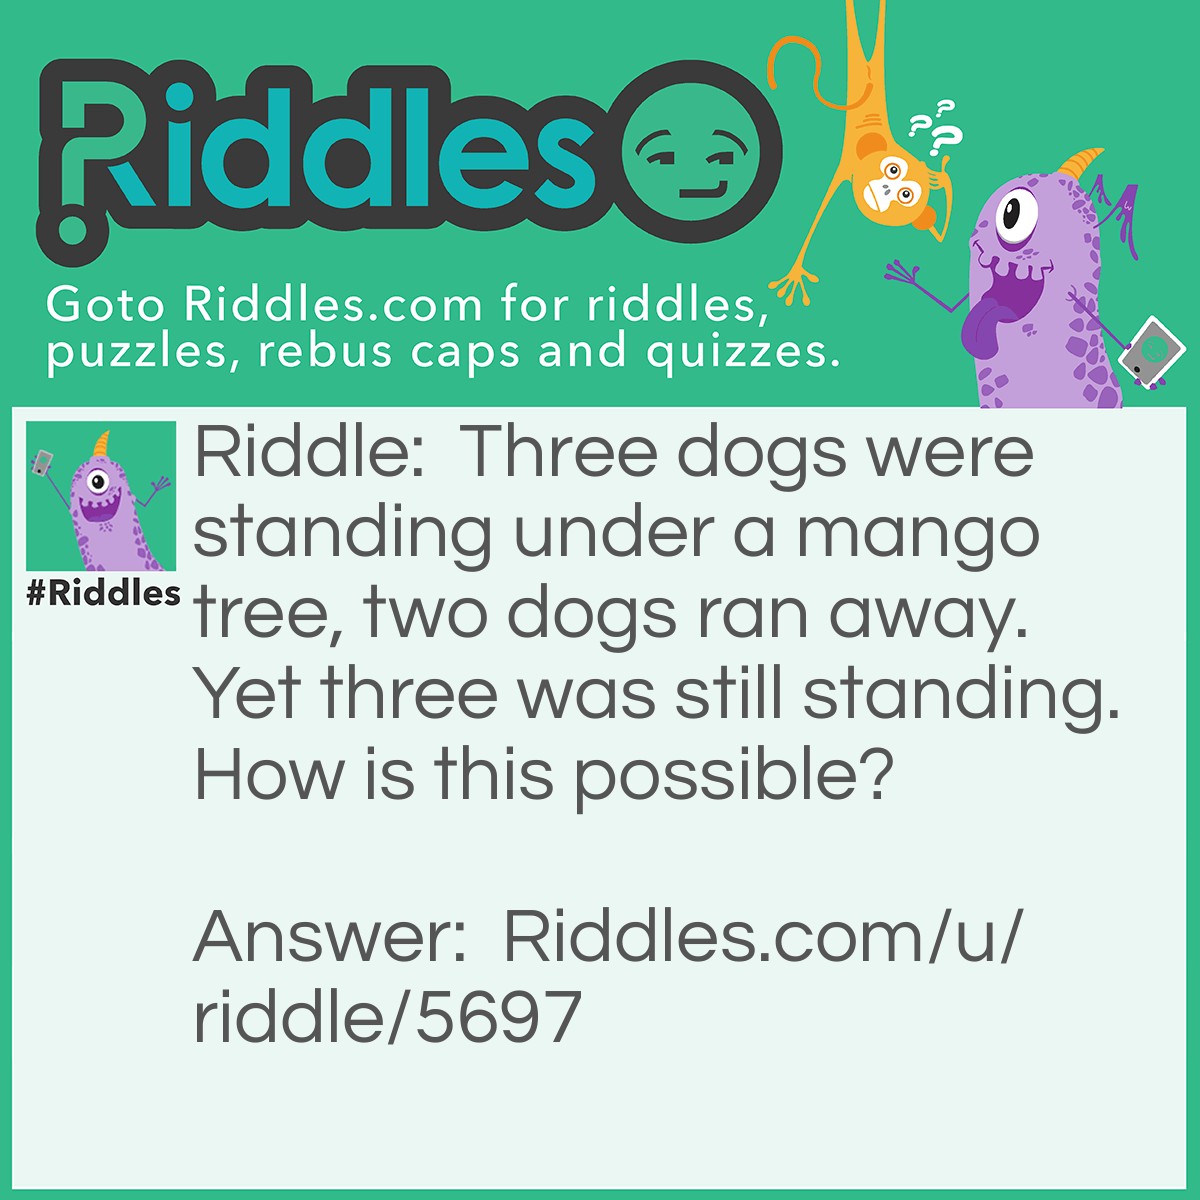 Riddle: Three dogs were standing under a mango tree, two dogs ran away. Yet three was still standing. How is this possible? Answer: One of the dogs is called THREE. As two of the dogs ran away, Three the third dog was still standing.